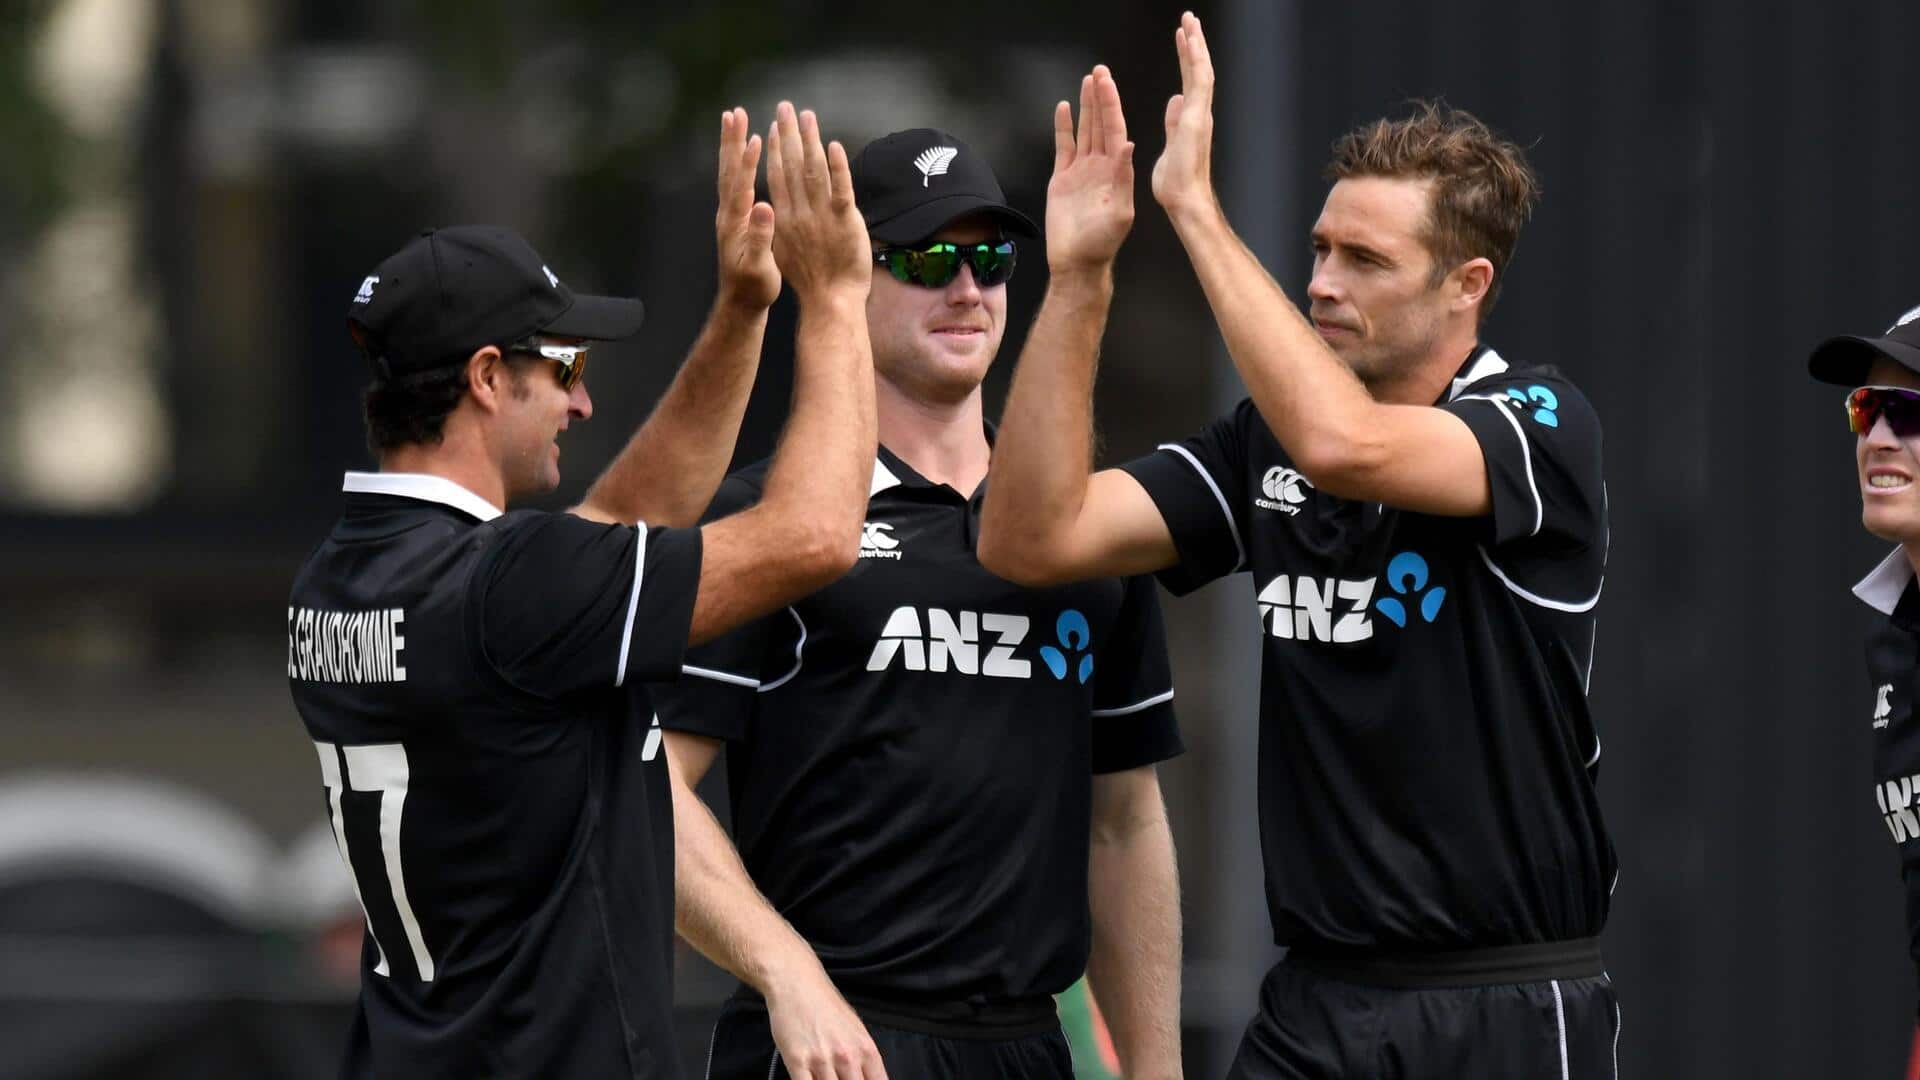 Tim Southee to undergo surgery; will he recover in time?